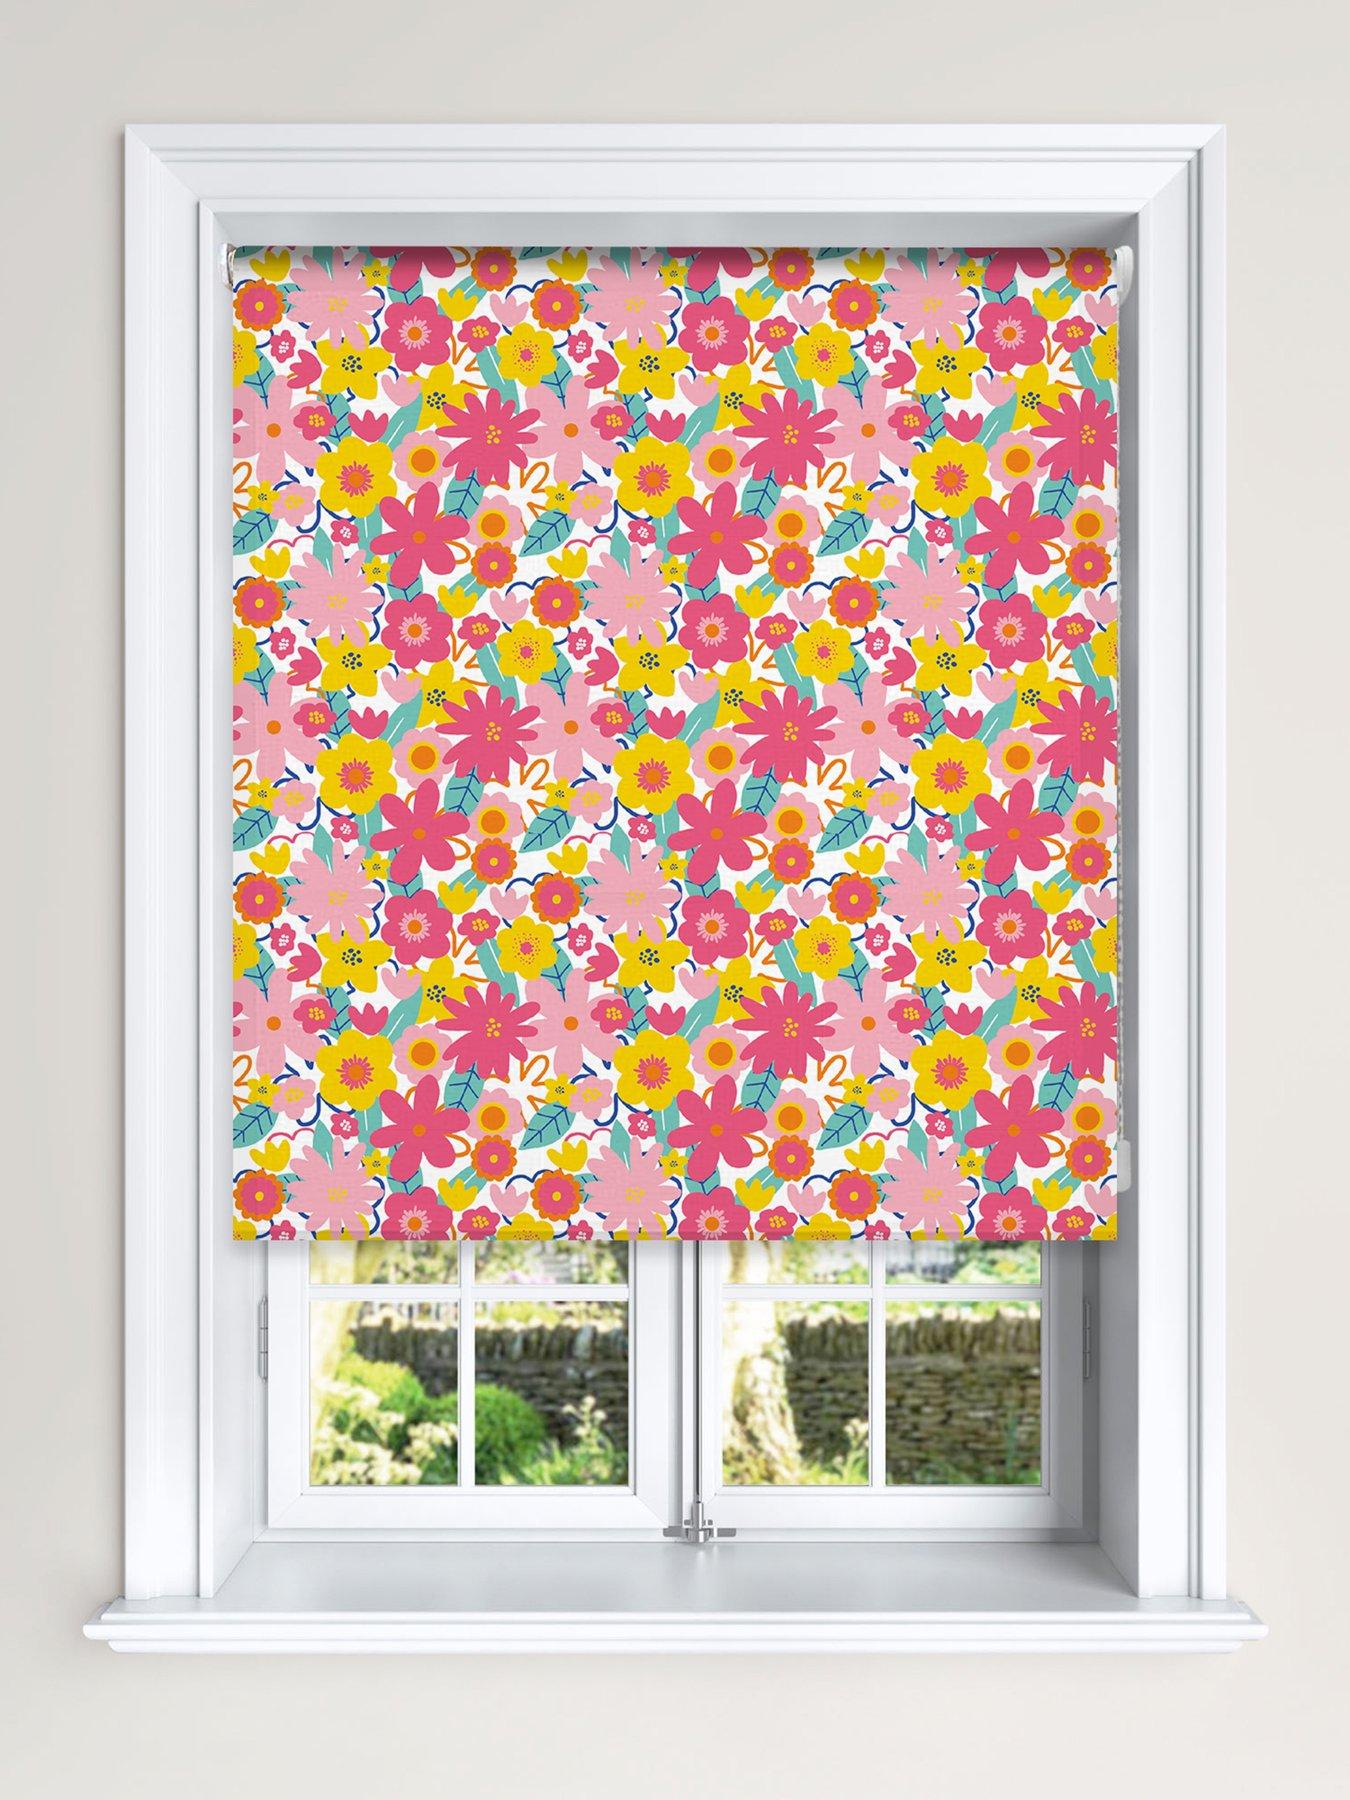 Details about   100% THERMAL BLACKOUT ROLLER BLINDS BLIND UP TO 180cm WIDTH & MANY COLOURS UK 